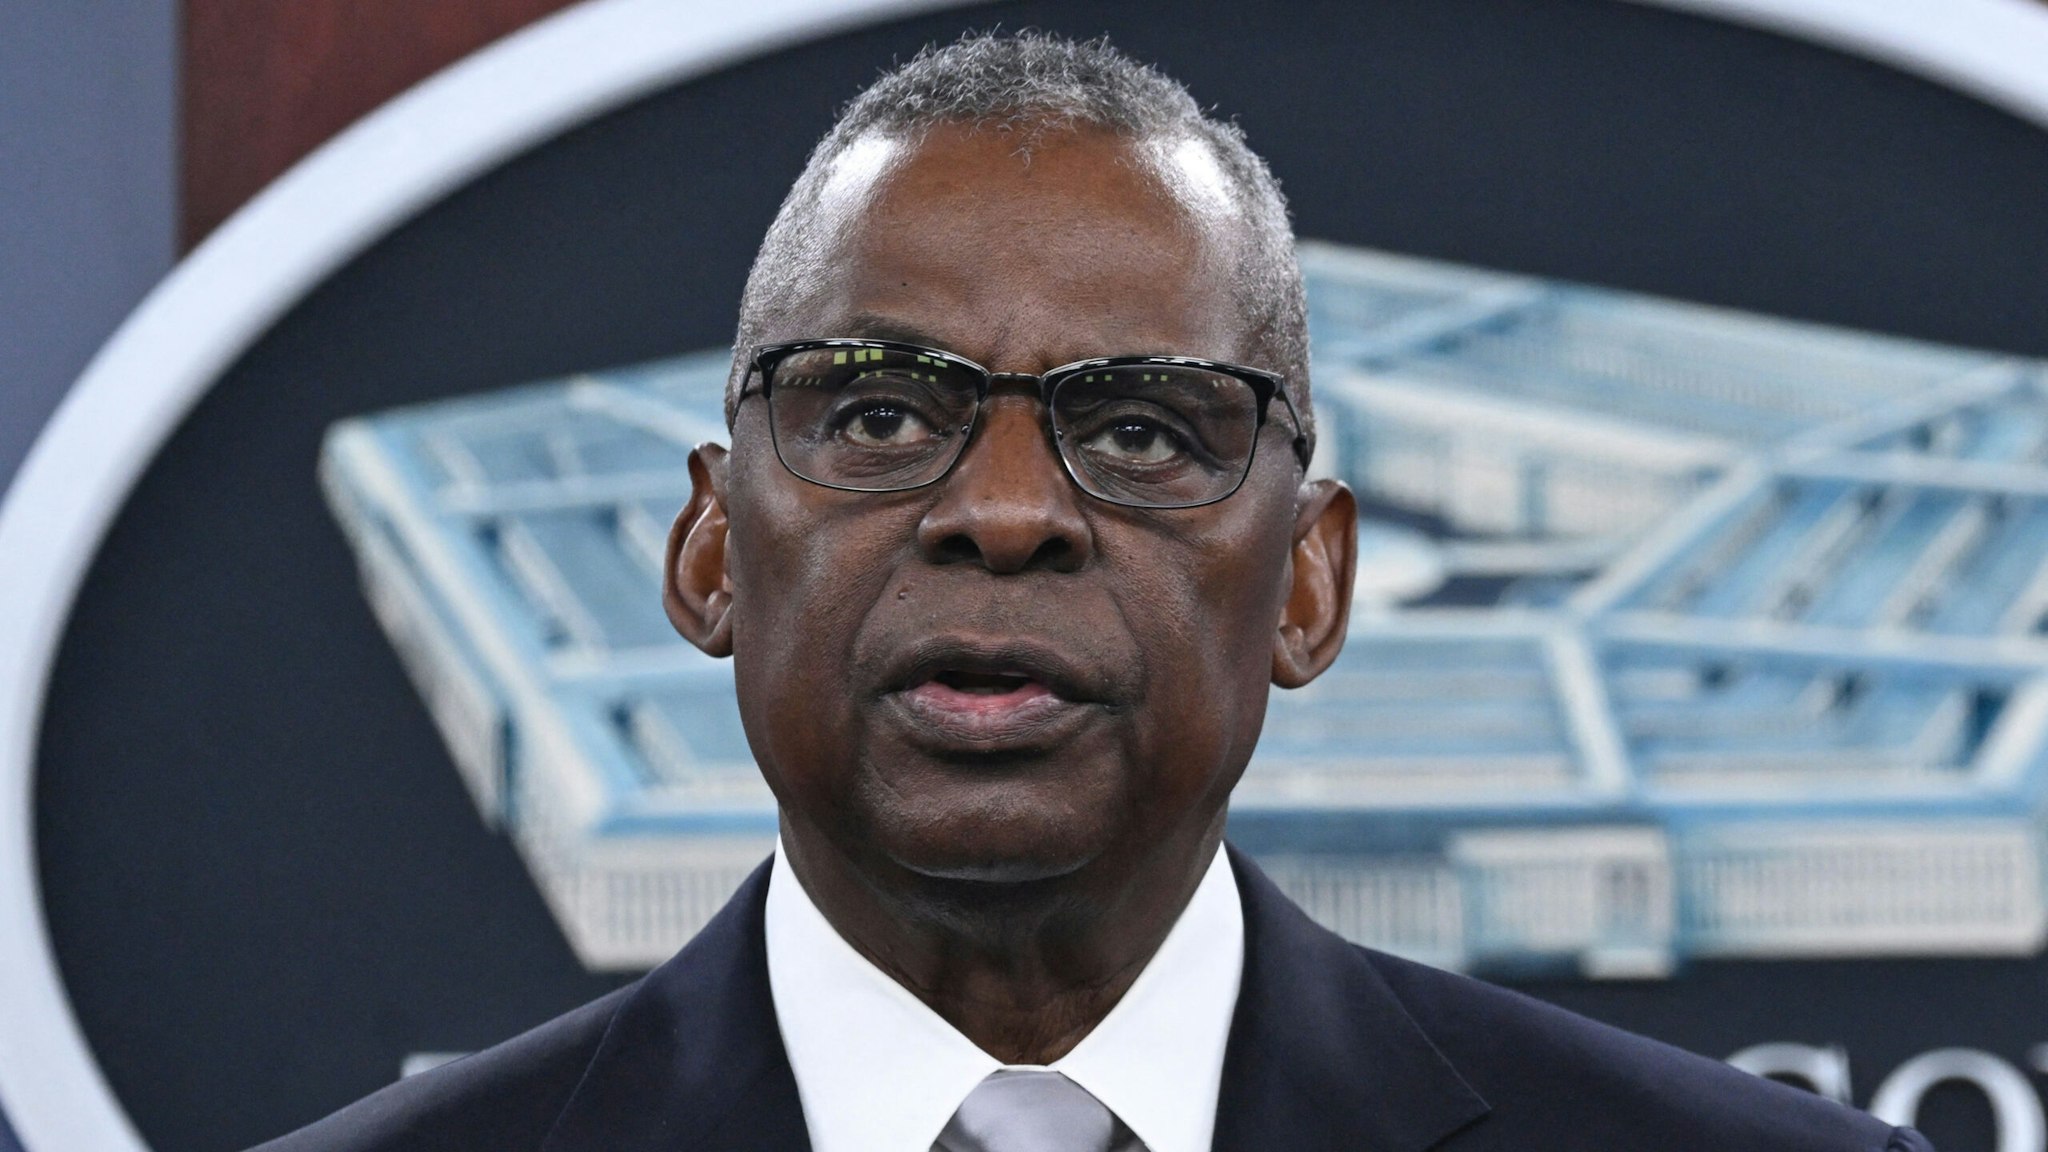 US Defense Secretary Lloyd Austin takes questions during a press conference at the Pentagon in Washington, DC, on February 1, 2024. Austin apologized for concealing his prostate cancer diagnosis and hospitalization from US President Joe Biden and the rest of the government.